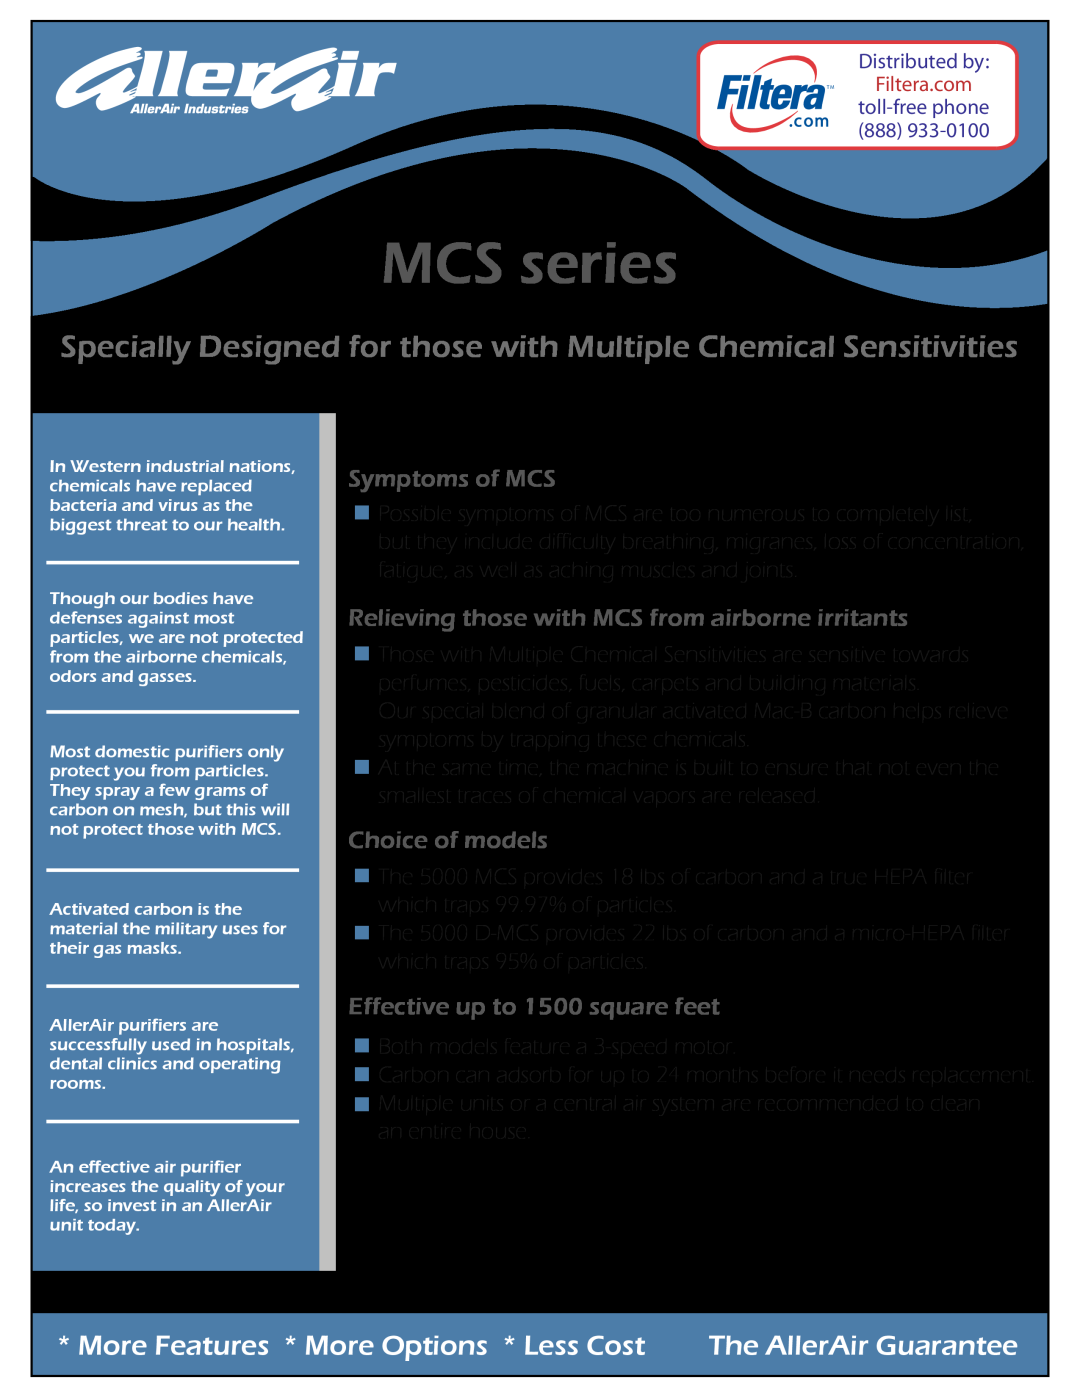 AllerAir 5000 MCS manual Symptoms of MCS, Relieving those with MCS from airborne irritants, Choice of models, MCS series 